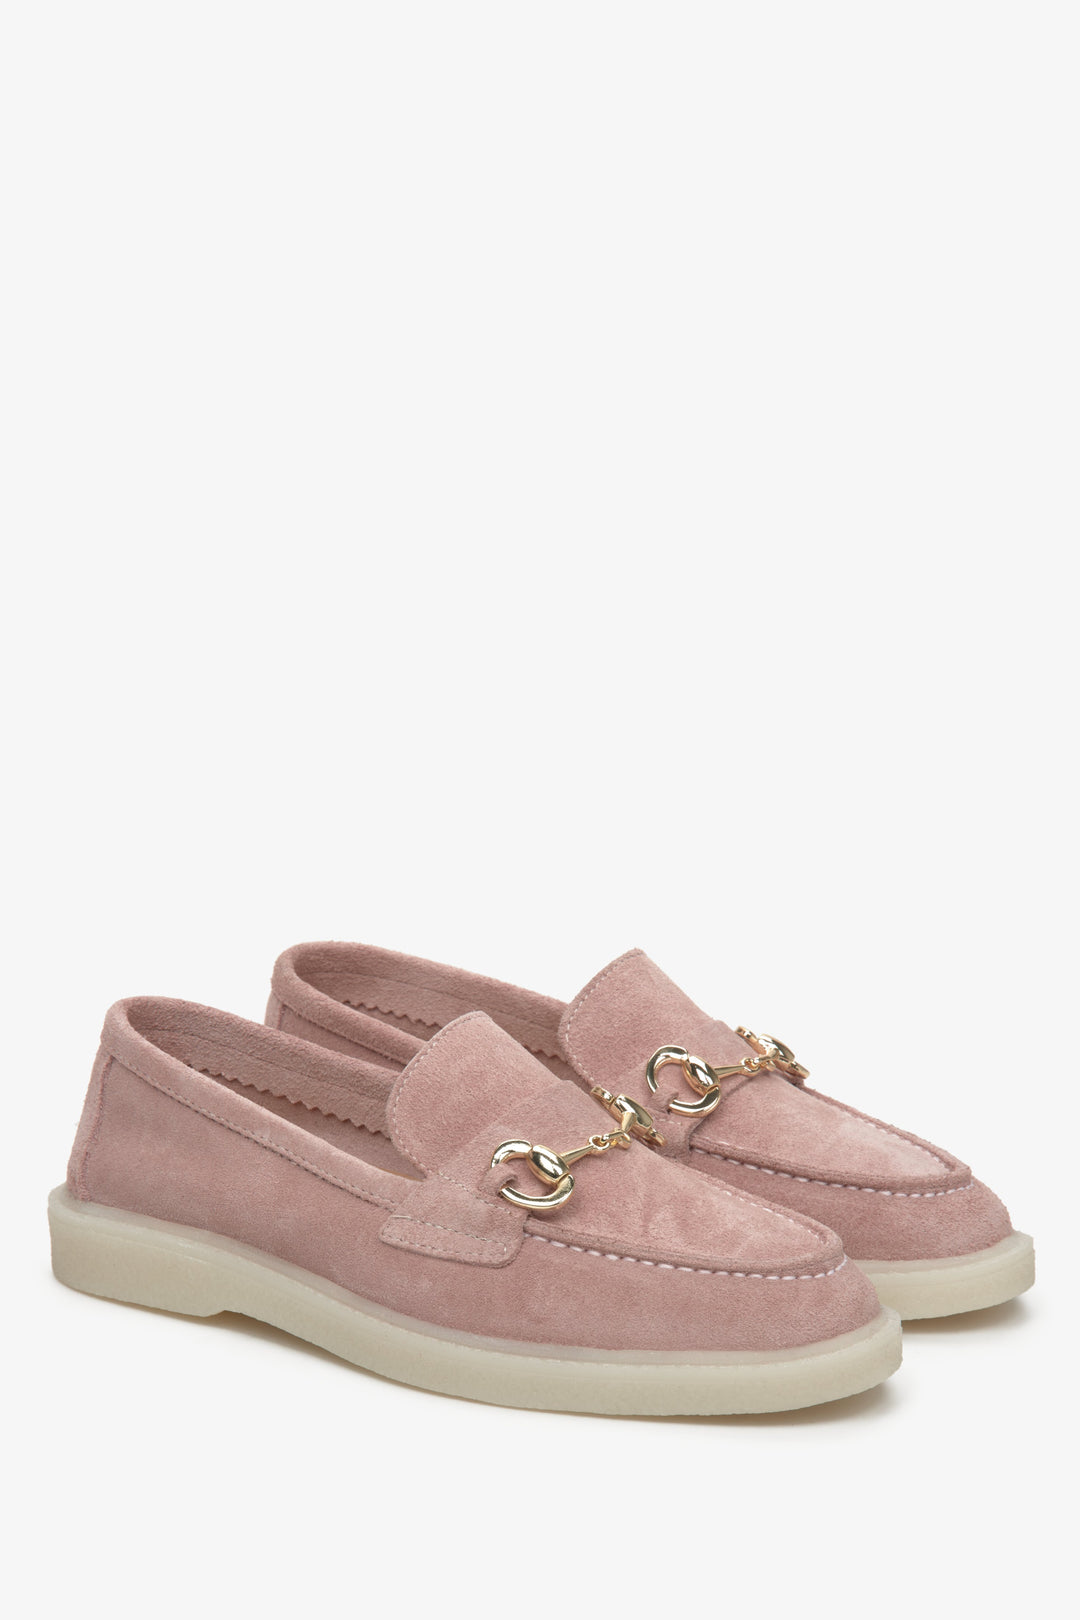 Women's Light Pink Velour Loafers with Gold Buckle Estro ER00113258